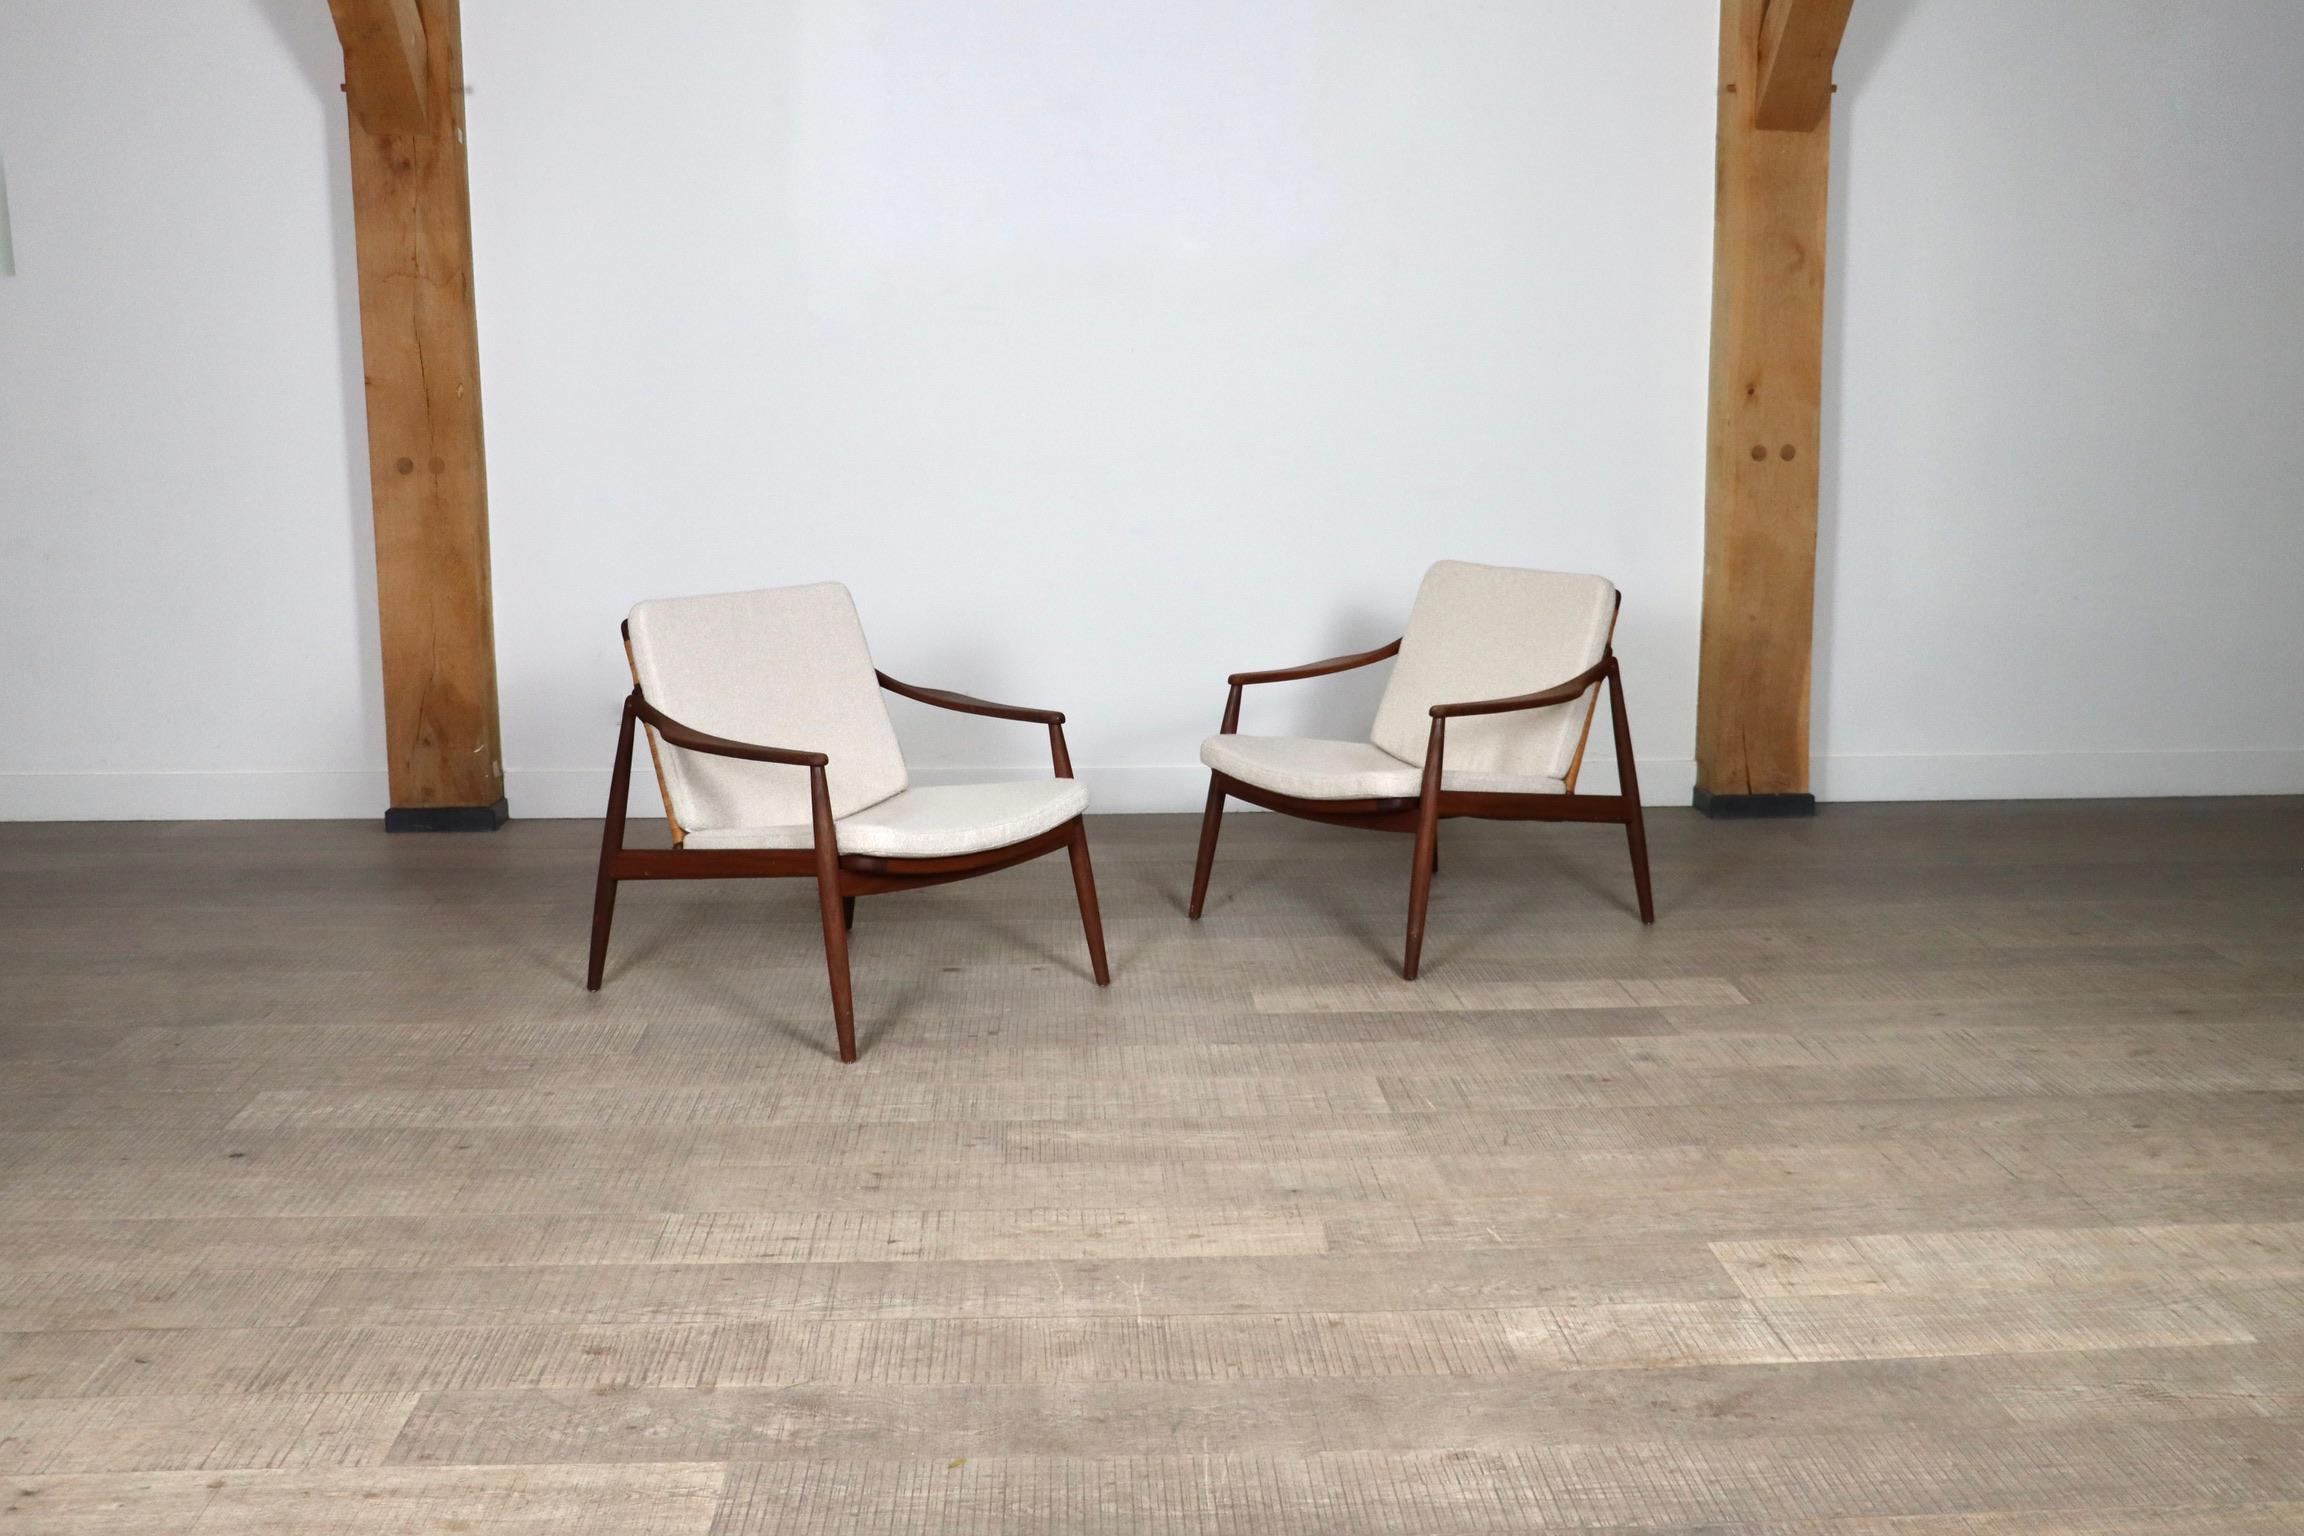 Nice pair of lounge chairs in teak and cane model 400 by Hartmut Lohmeyer for Wilkhahn, 1960s. A timeless design, with a woven cane seating and backrest and a solid teak frame. The cane is in excellent and original condition, which you don’t see